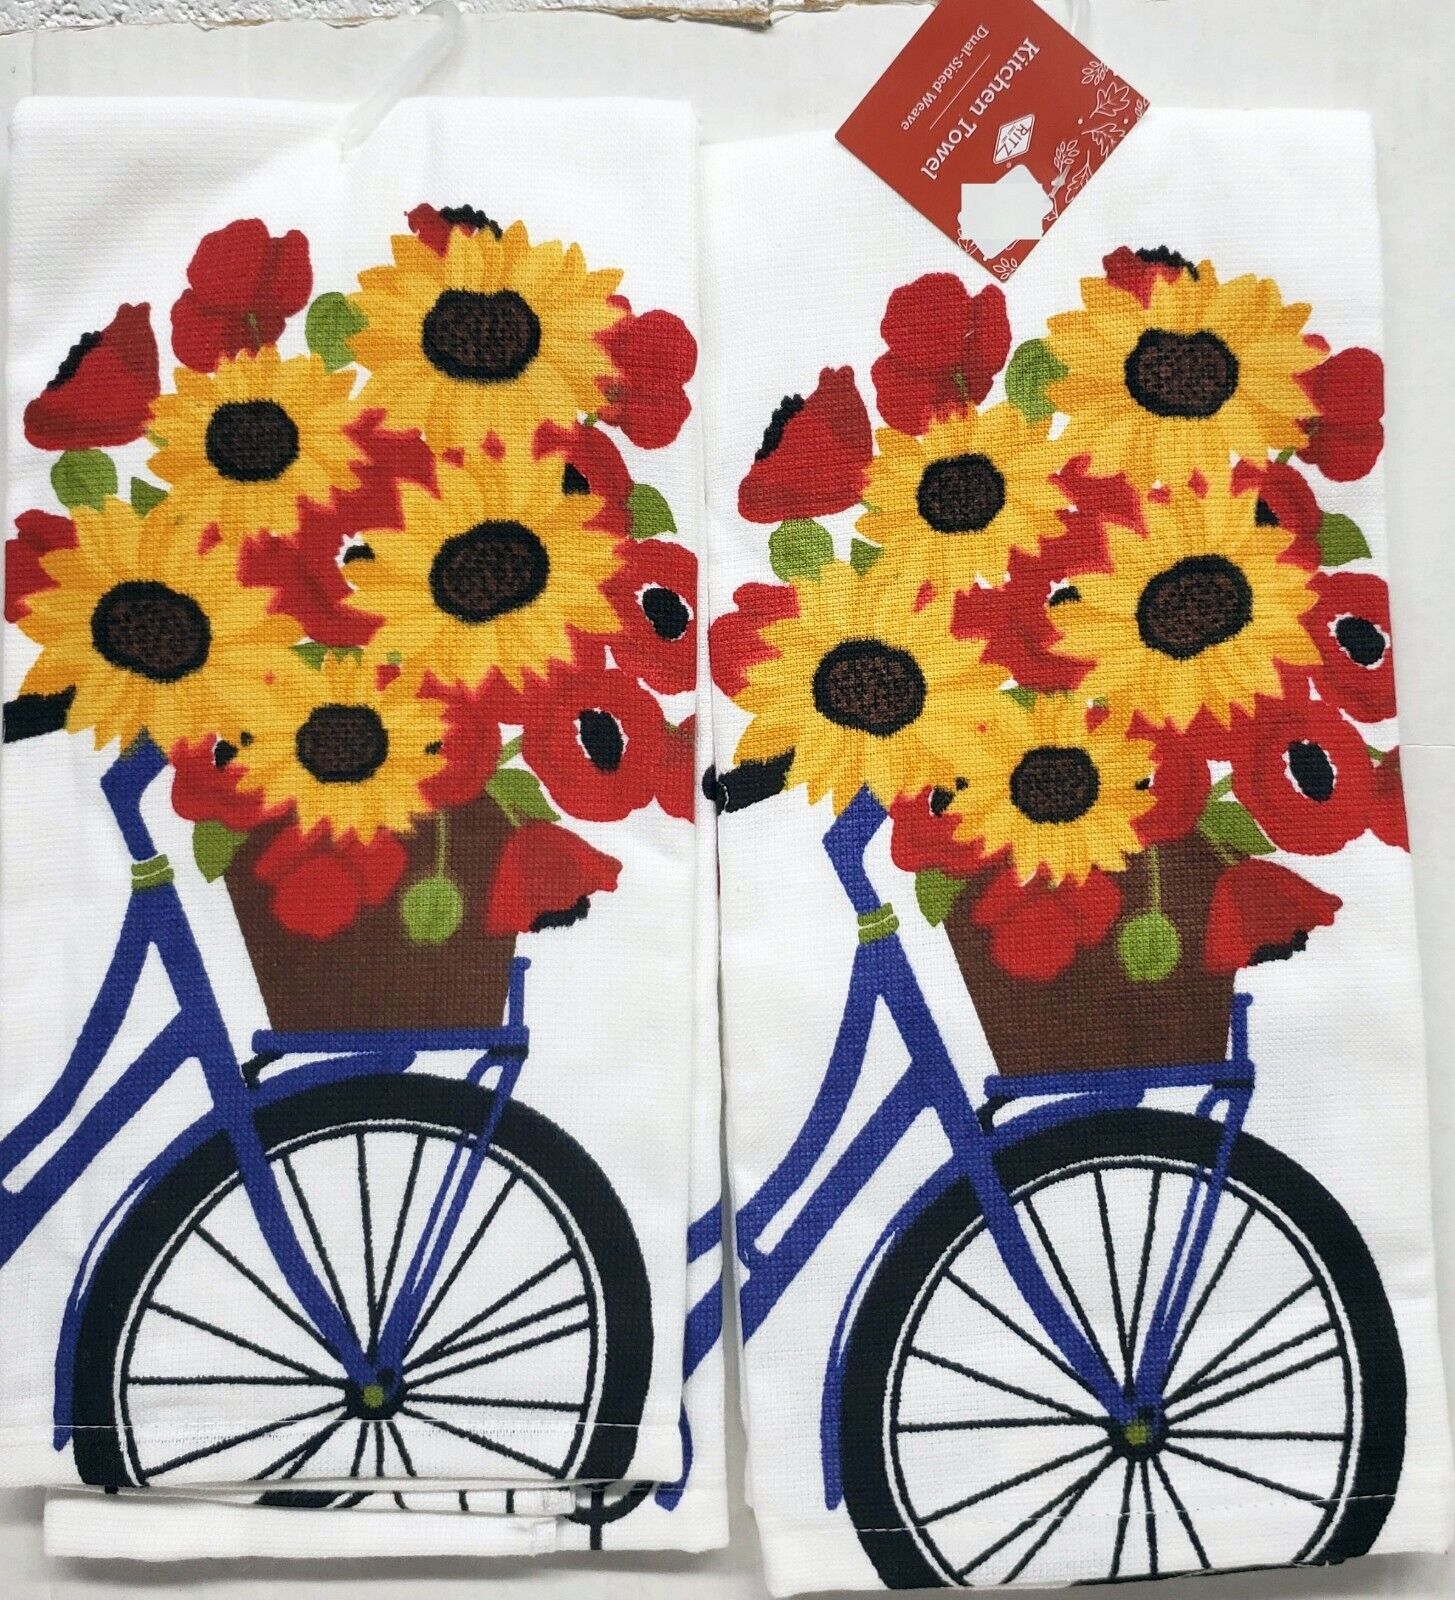 2 PRINTED COTTON KITCHEN TERRY TOWELS(16"x26") SUNFLOWERS & 